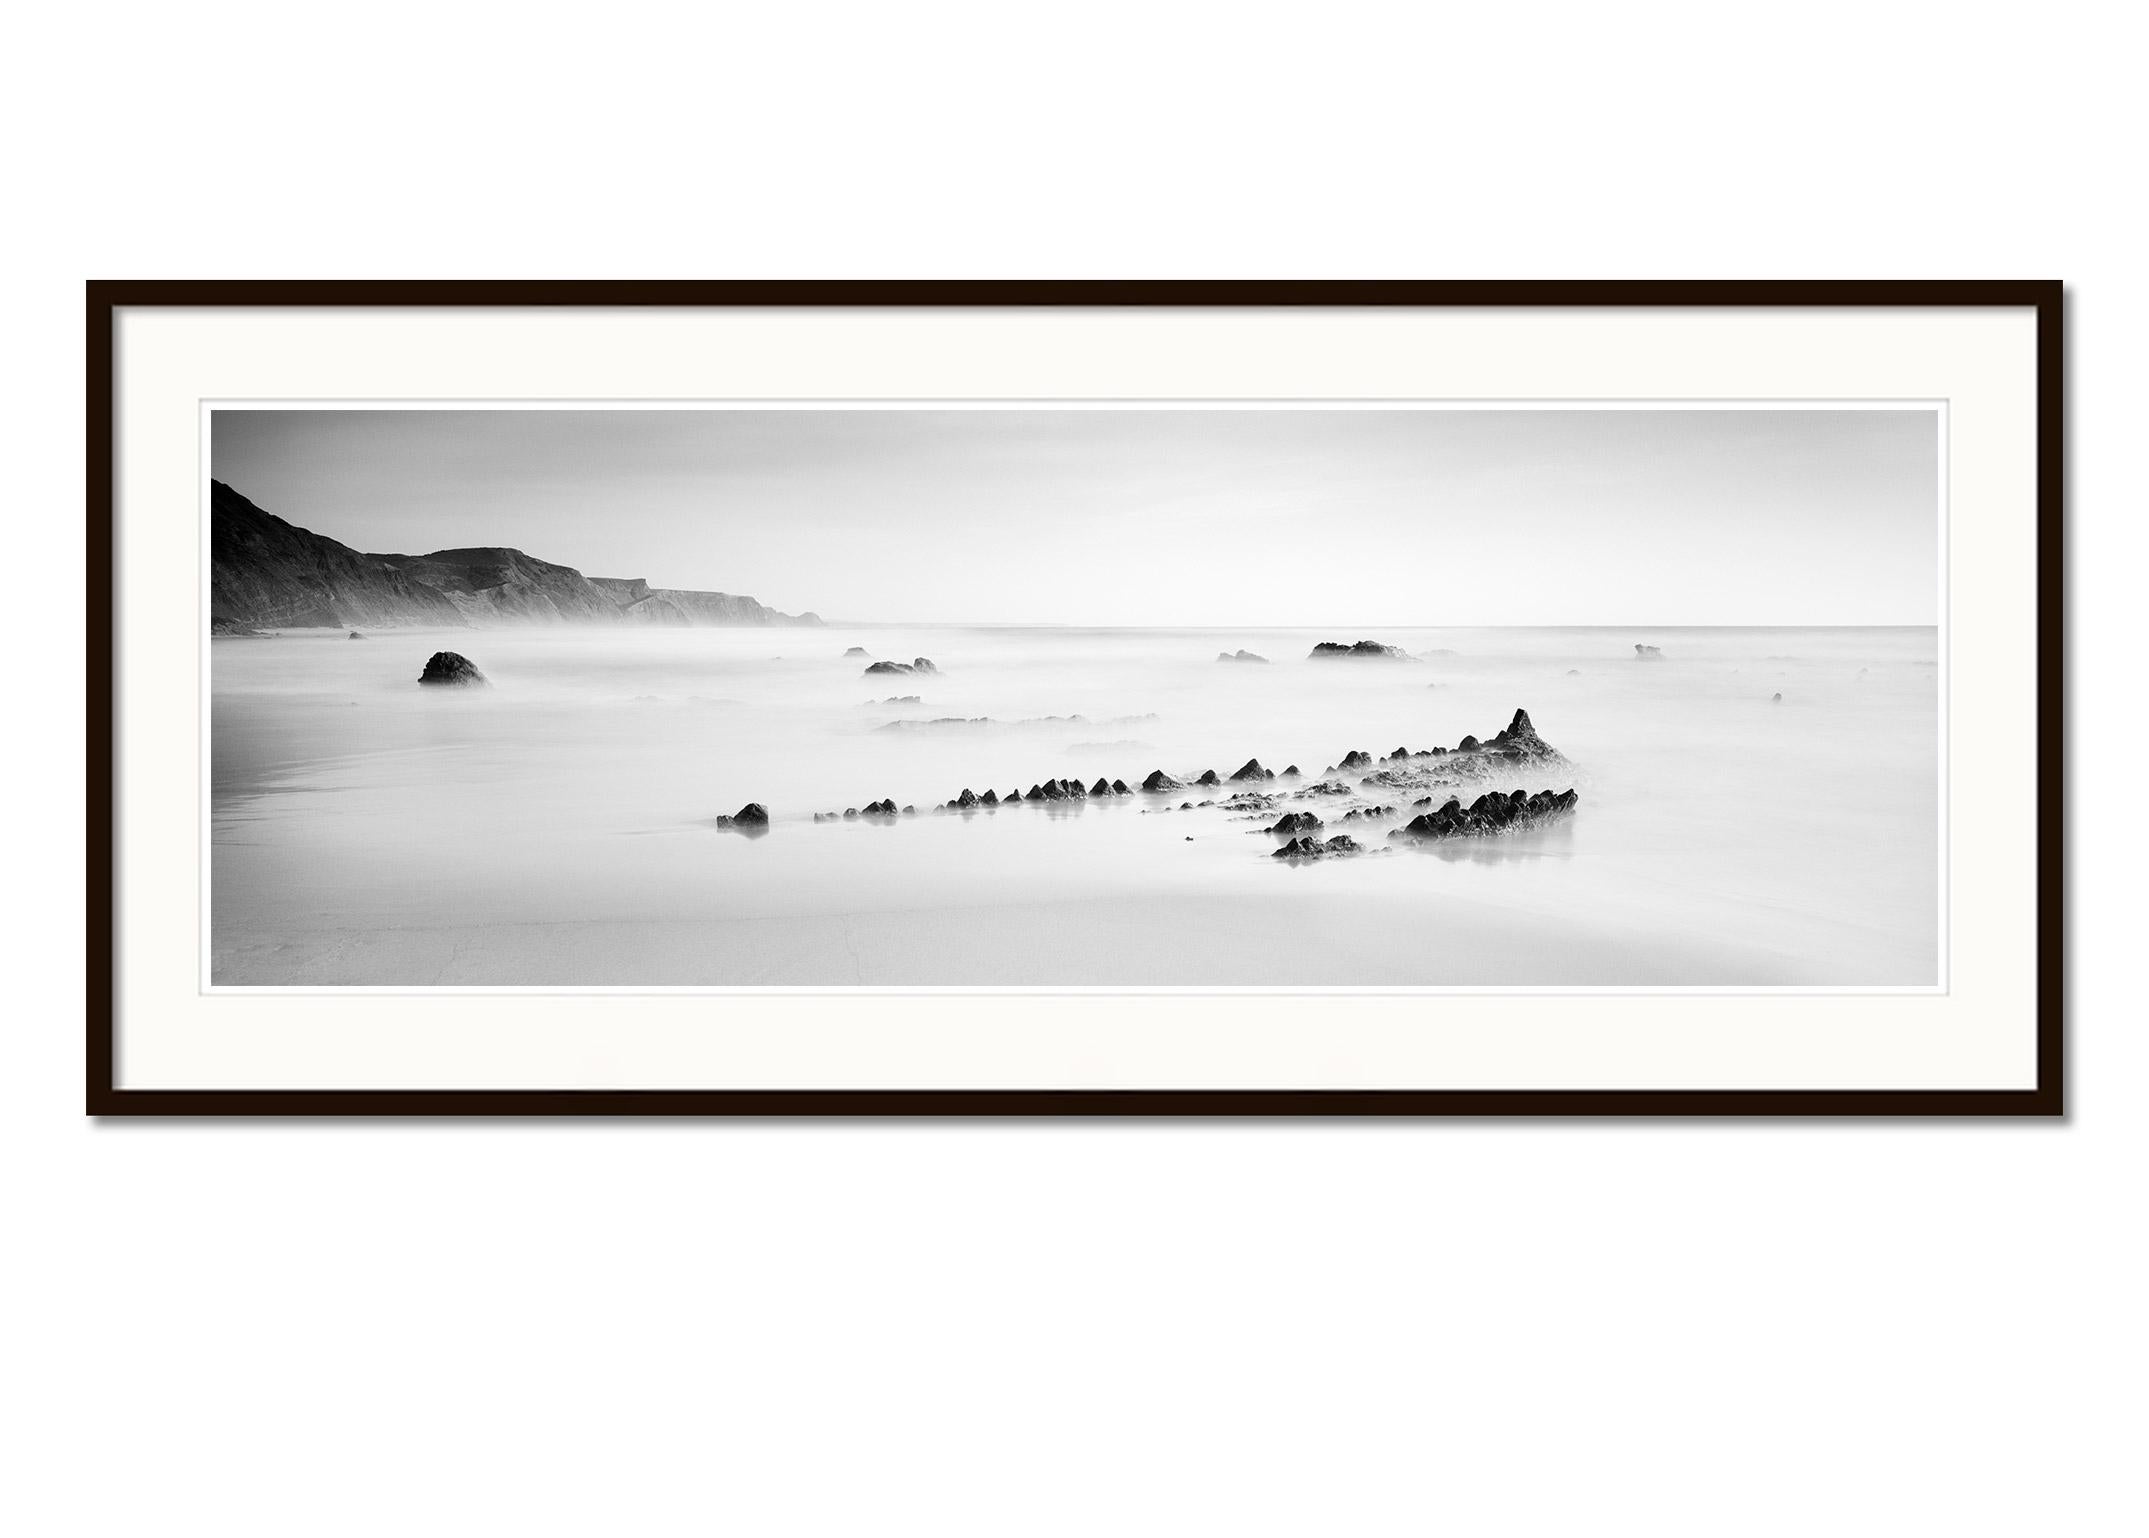 Fishbones Panorama, Beach, Shoreline, Portugal, black and white landscape print - Gray Landscape Photograph by Gerald Berghammer